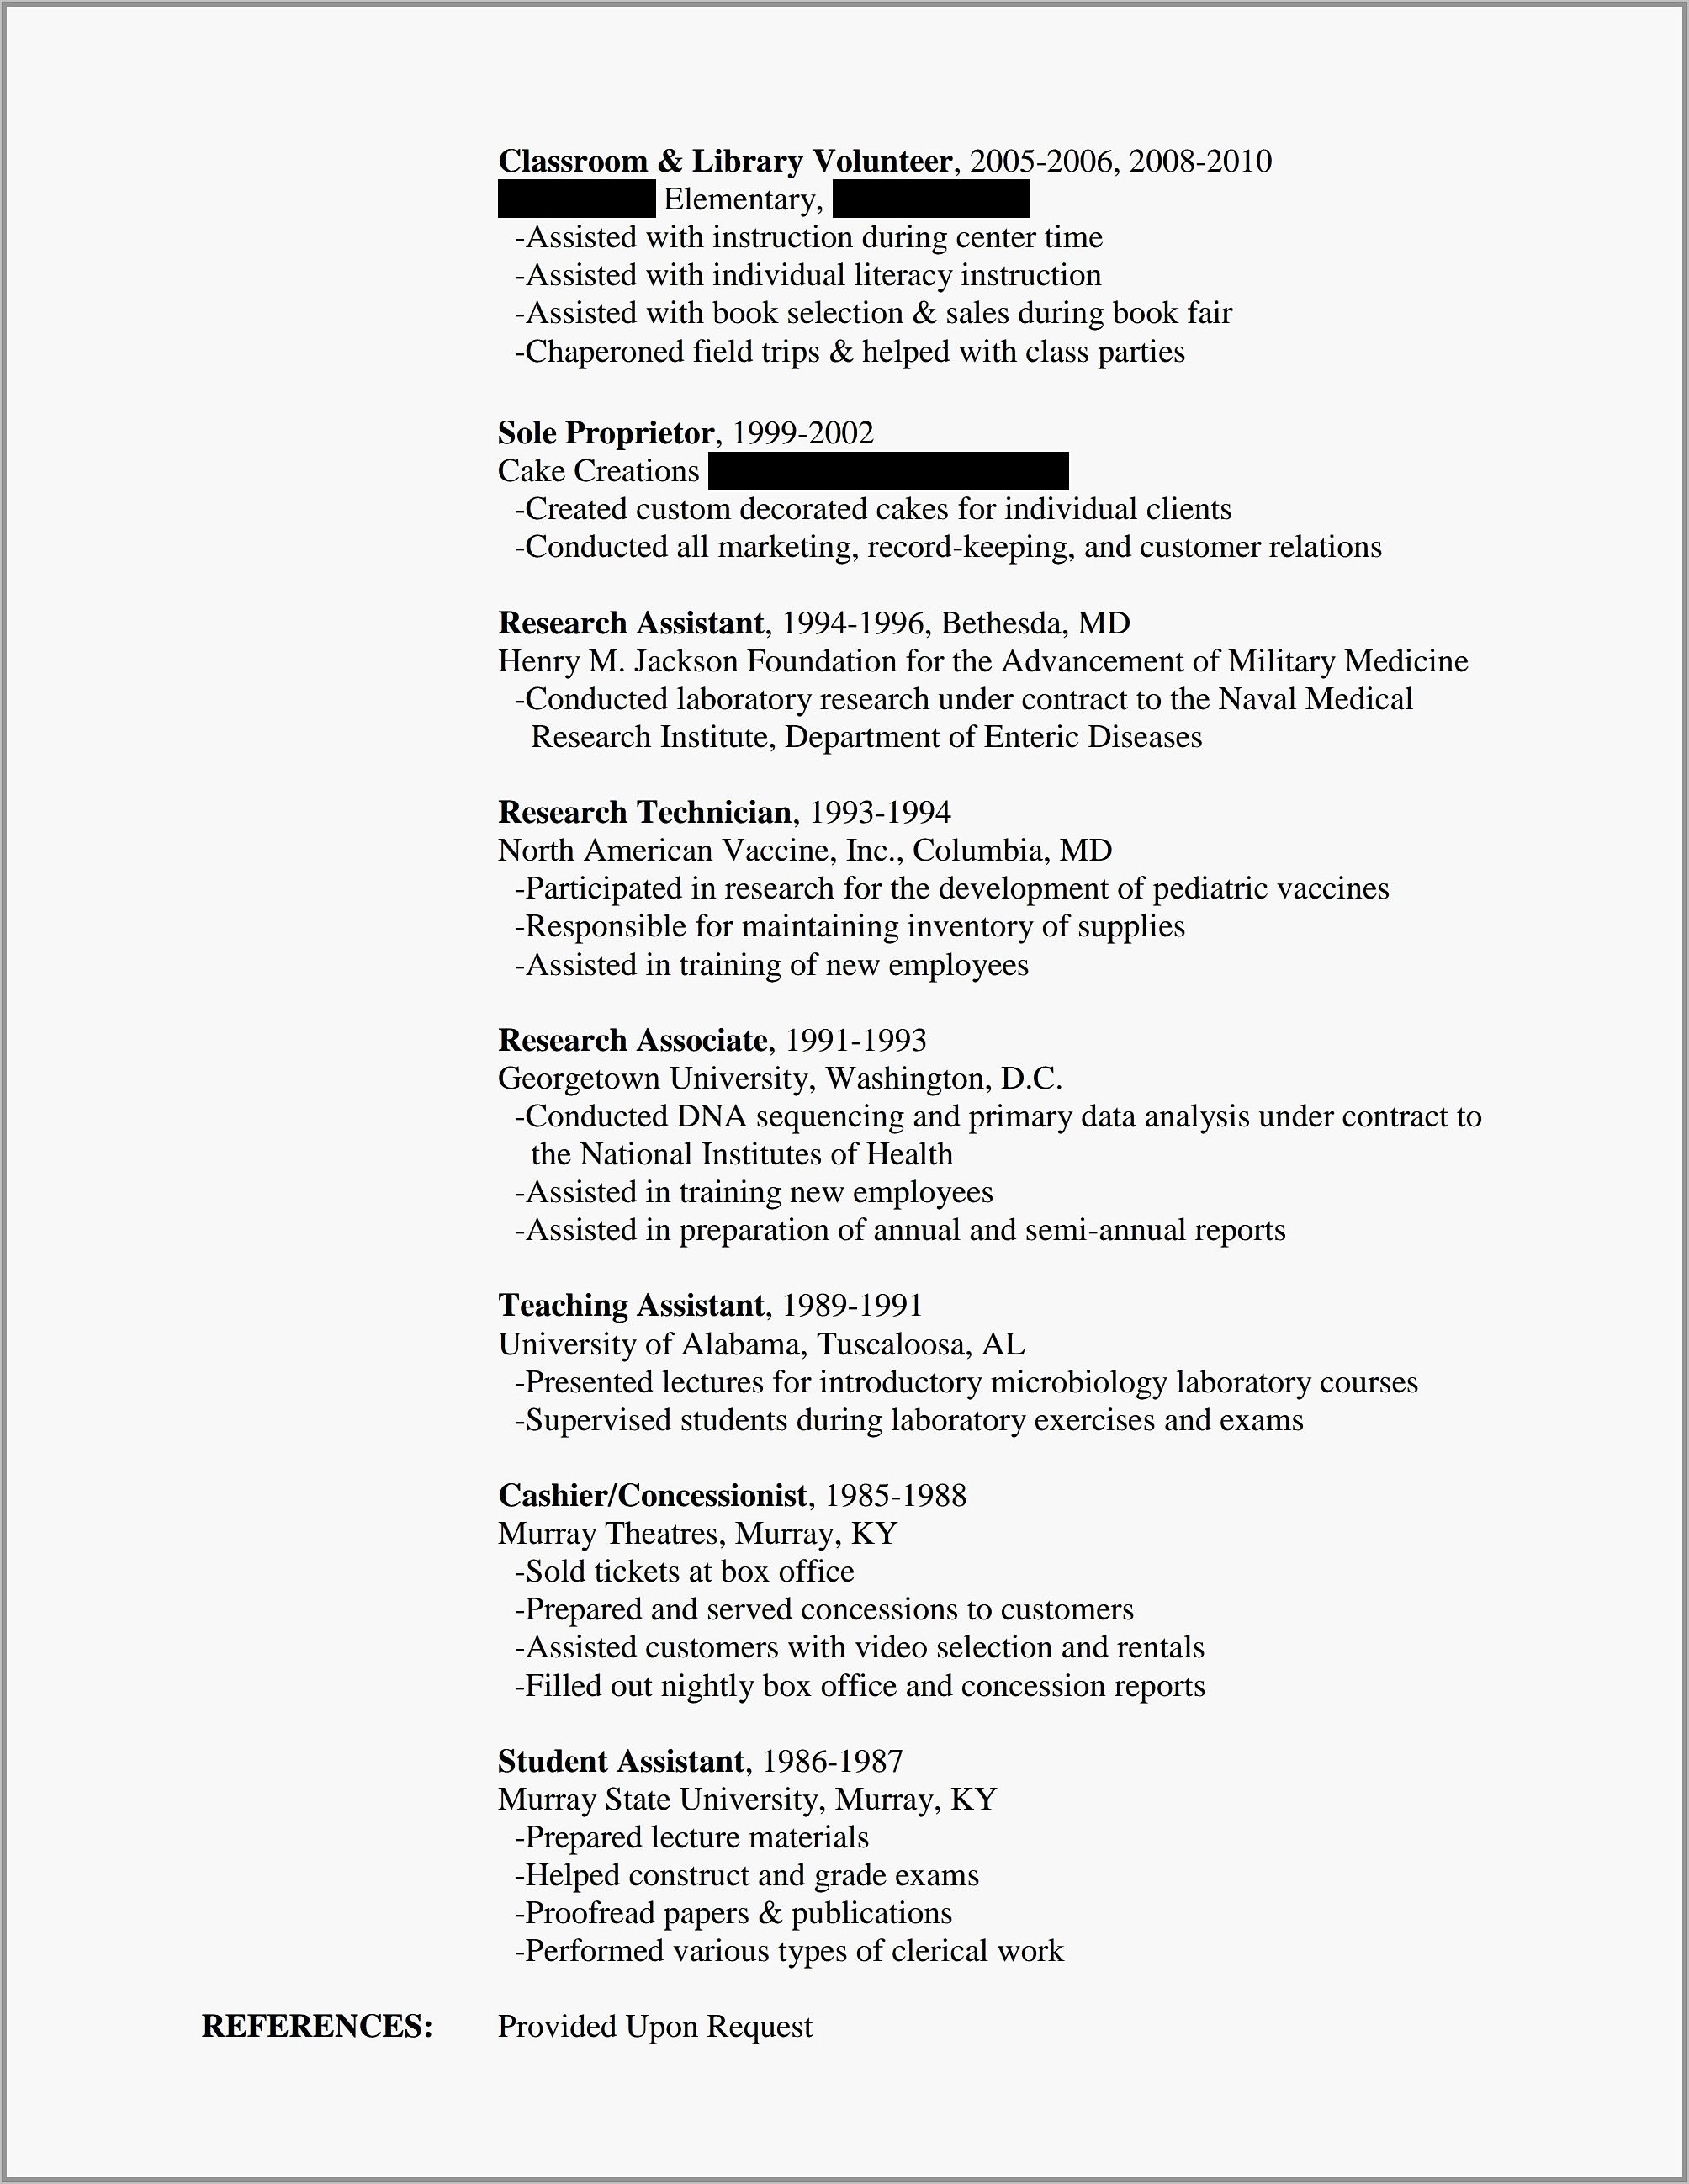 Free Resume Templates For Healthcare Workers